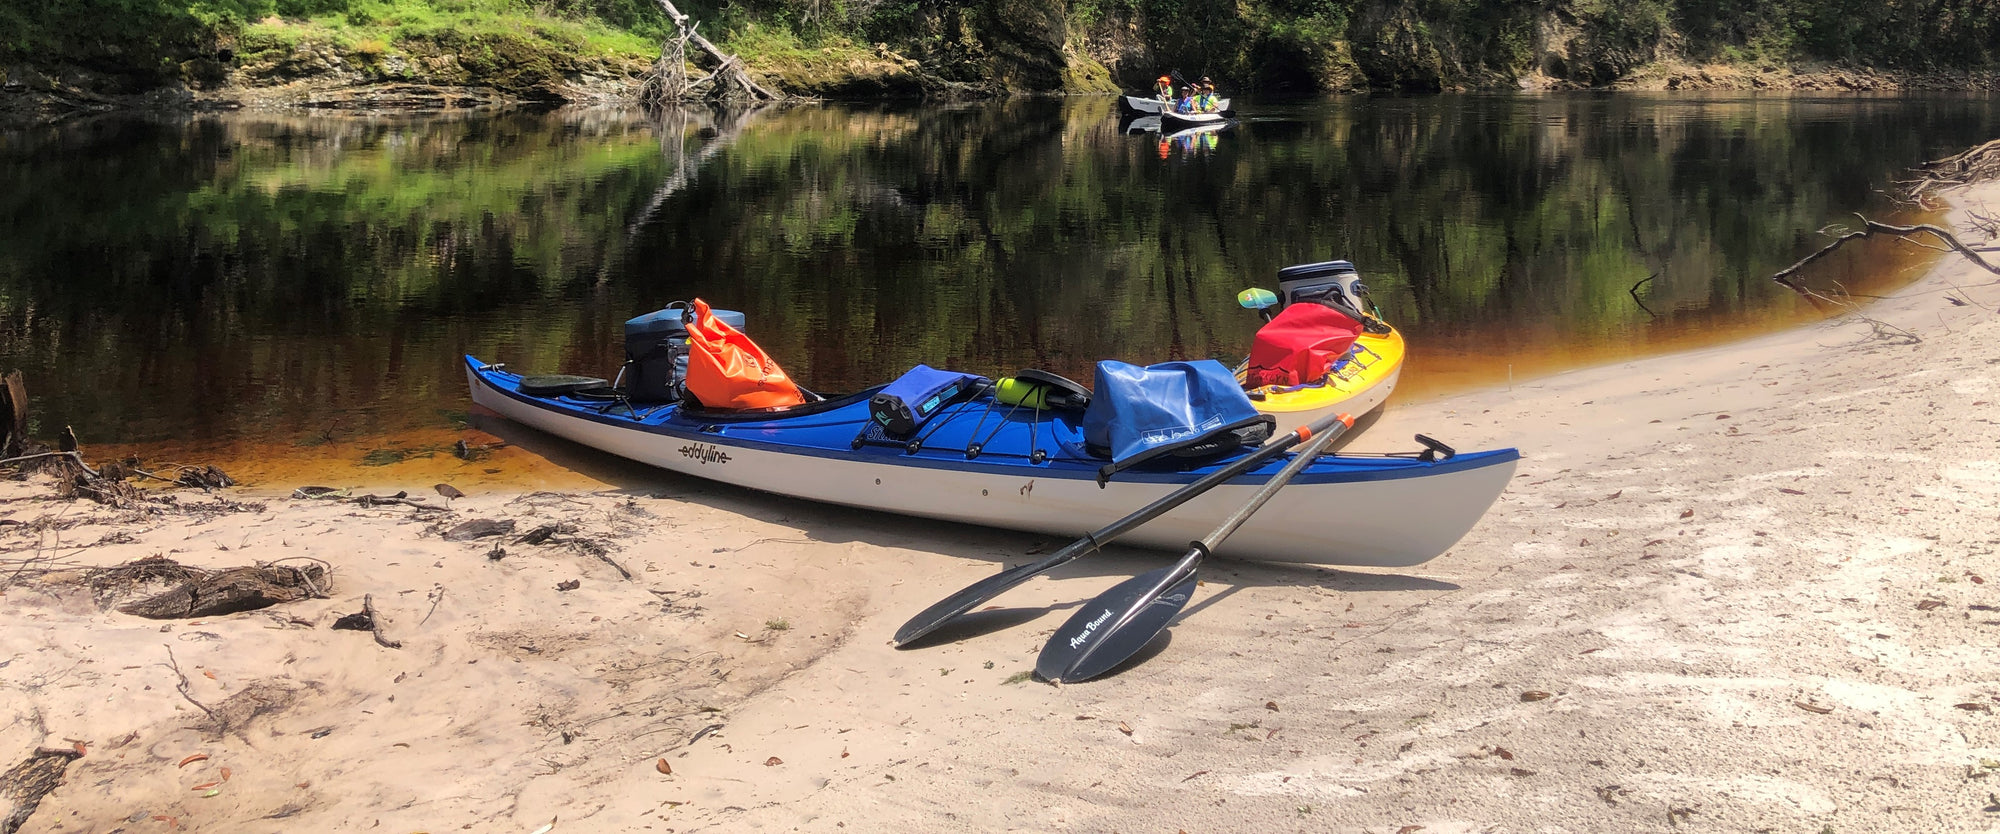 Trip Report: Kayak Camping on the Suwannee River